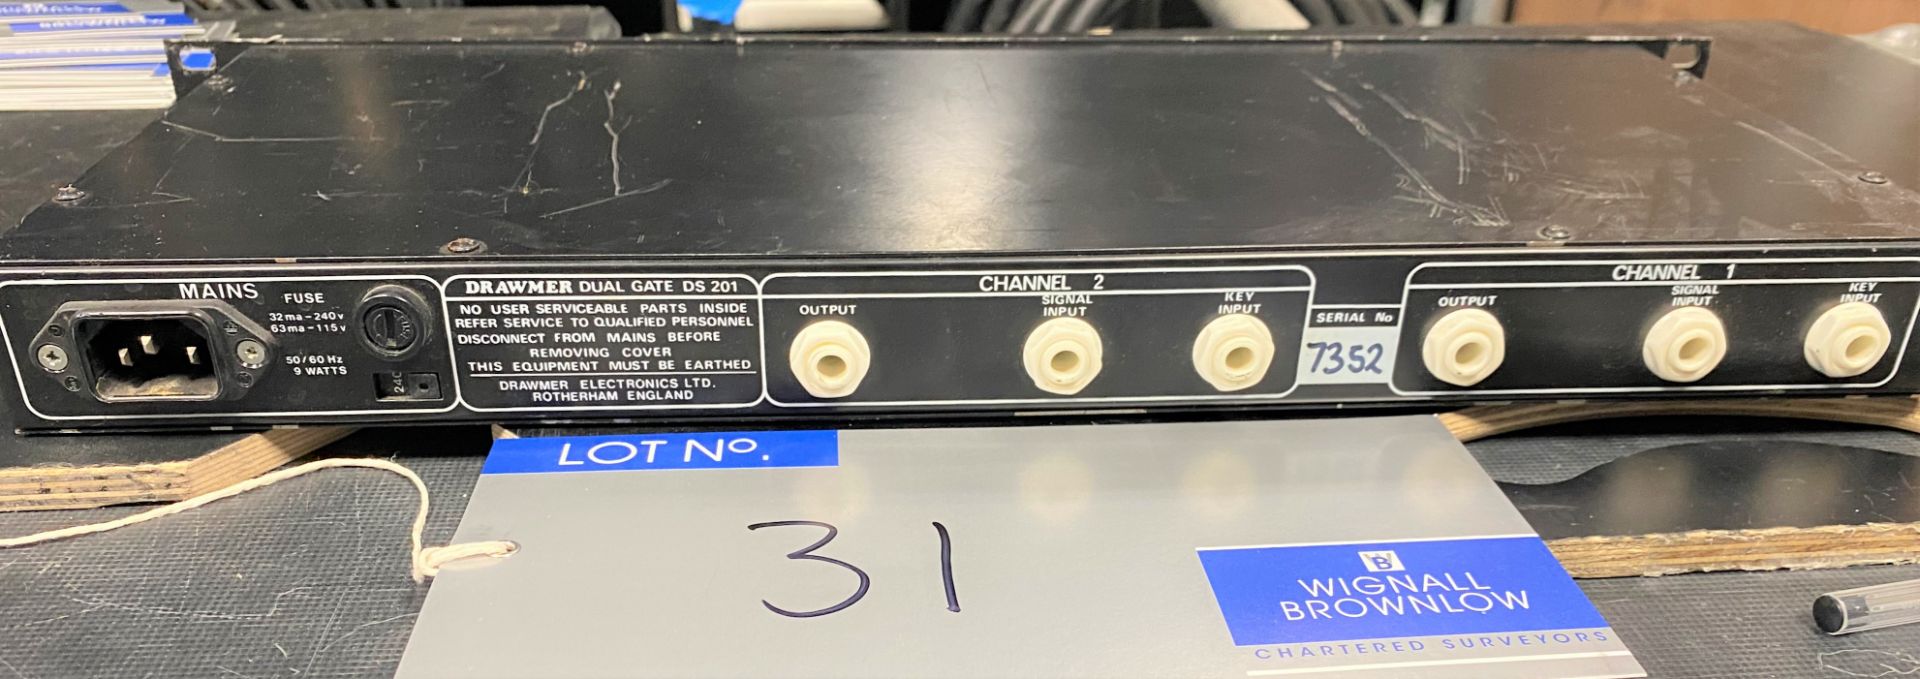 A Drawmer Dual Gate DS201 Dual Channel Noise Gate (powers up). - Image 2 of 2